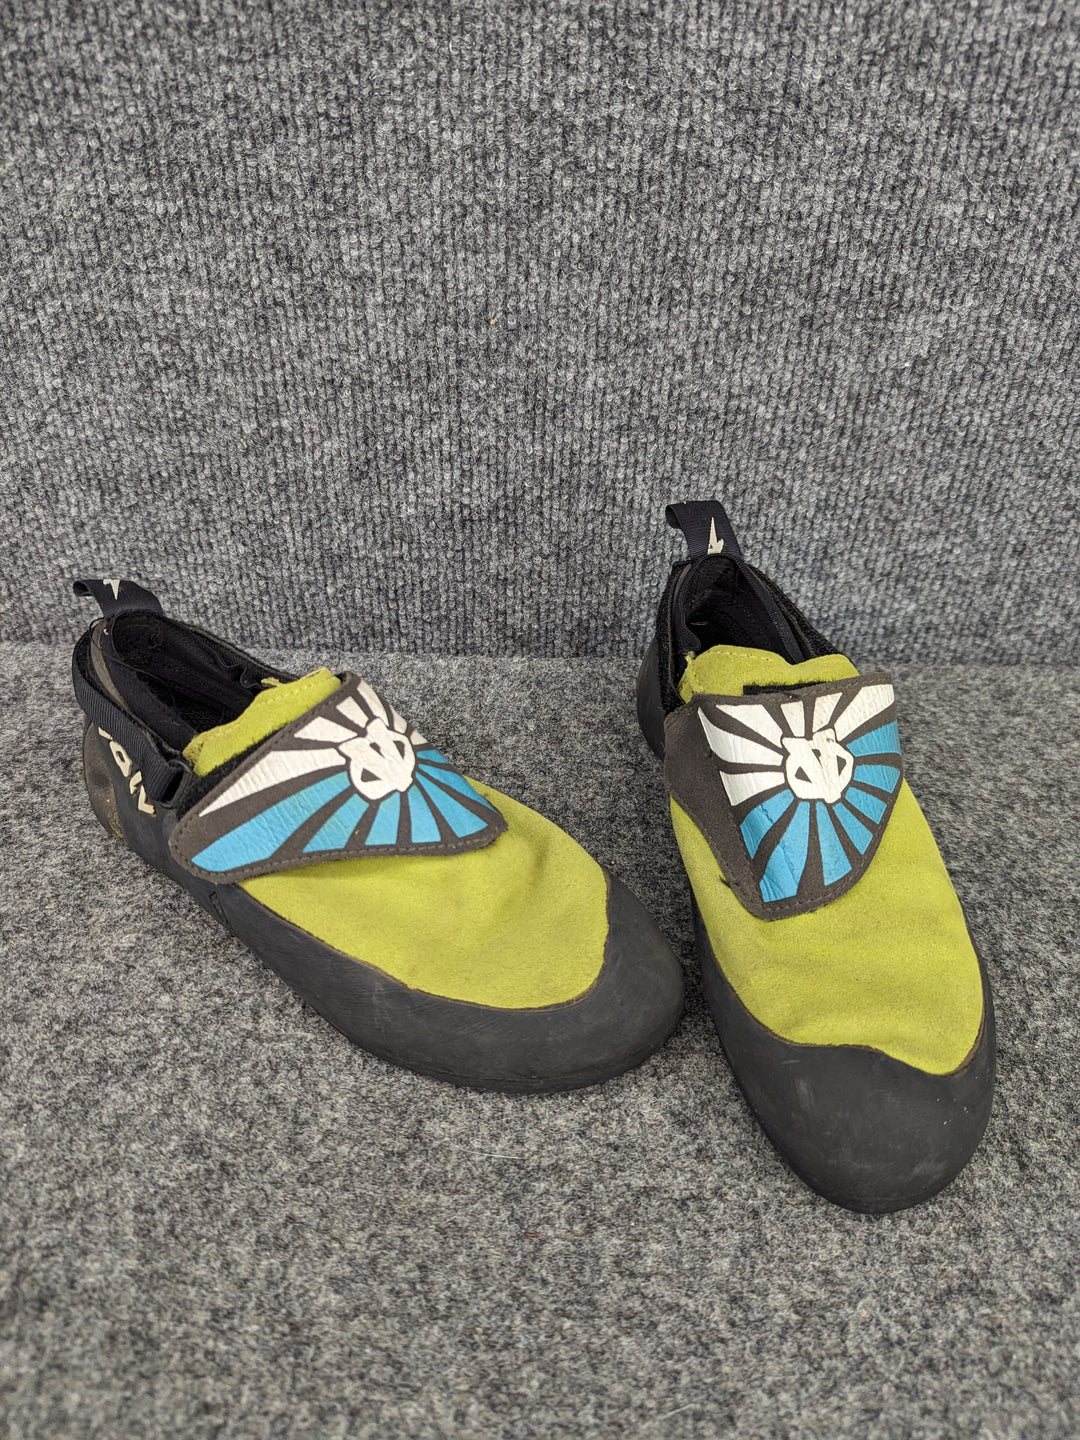 Size 5/36.5 Youth Climbing Shoes